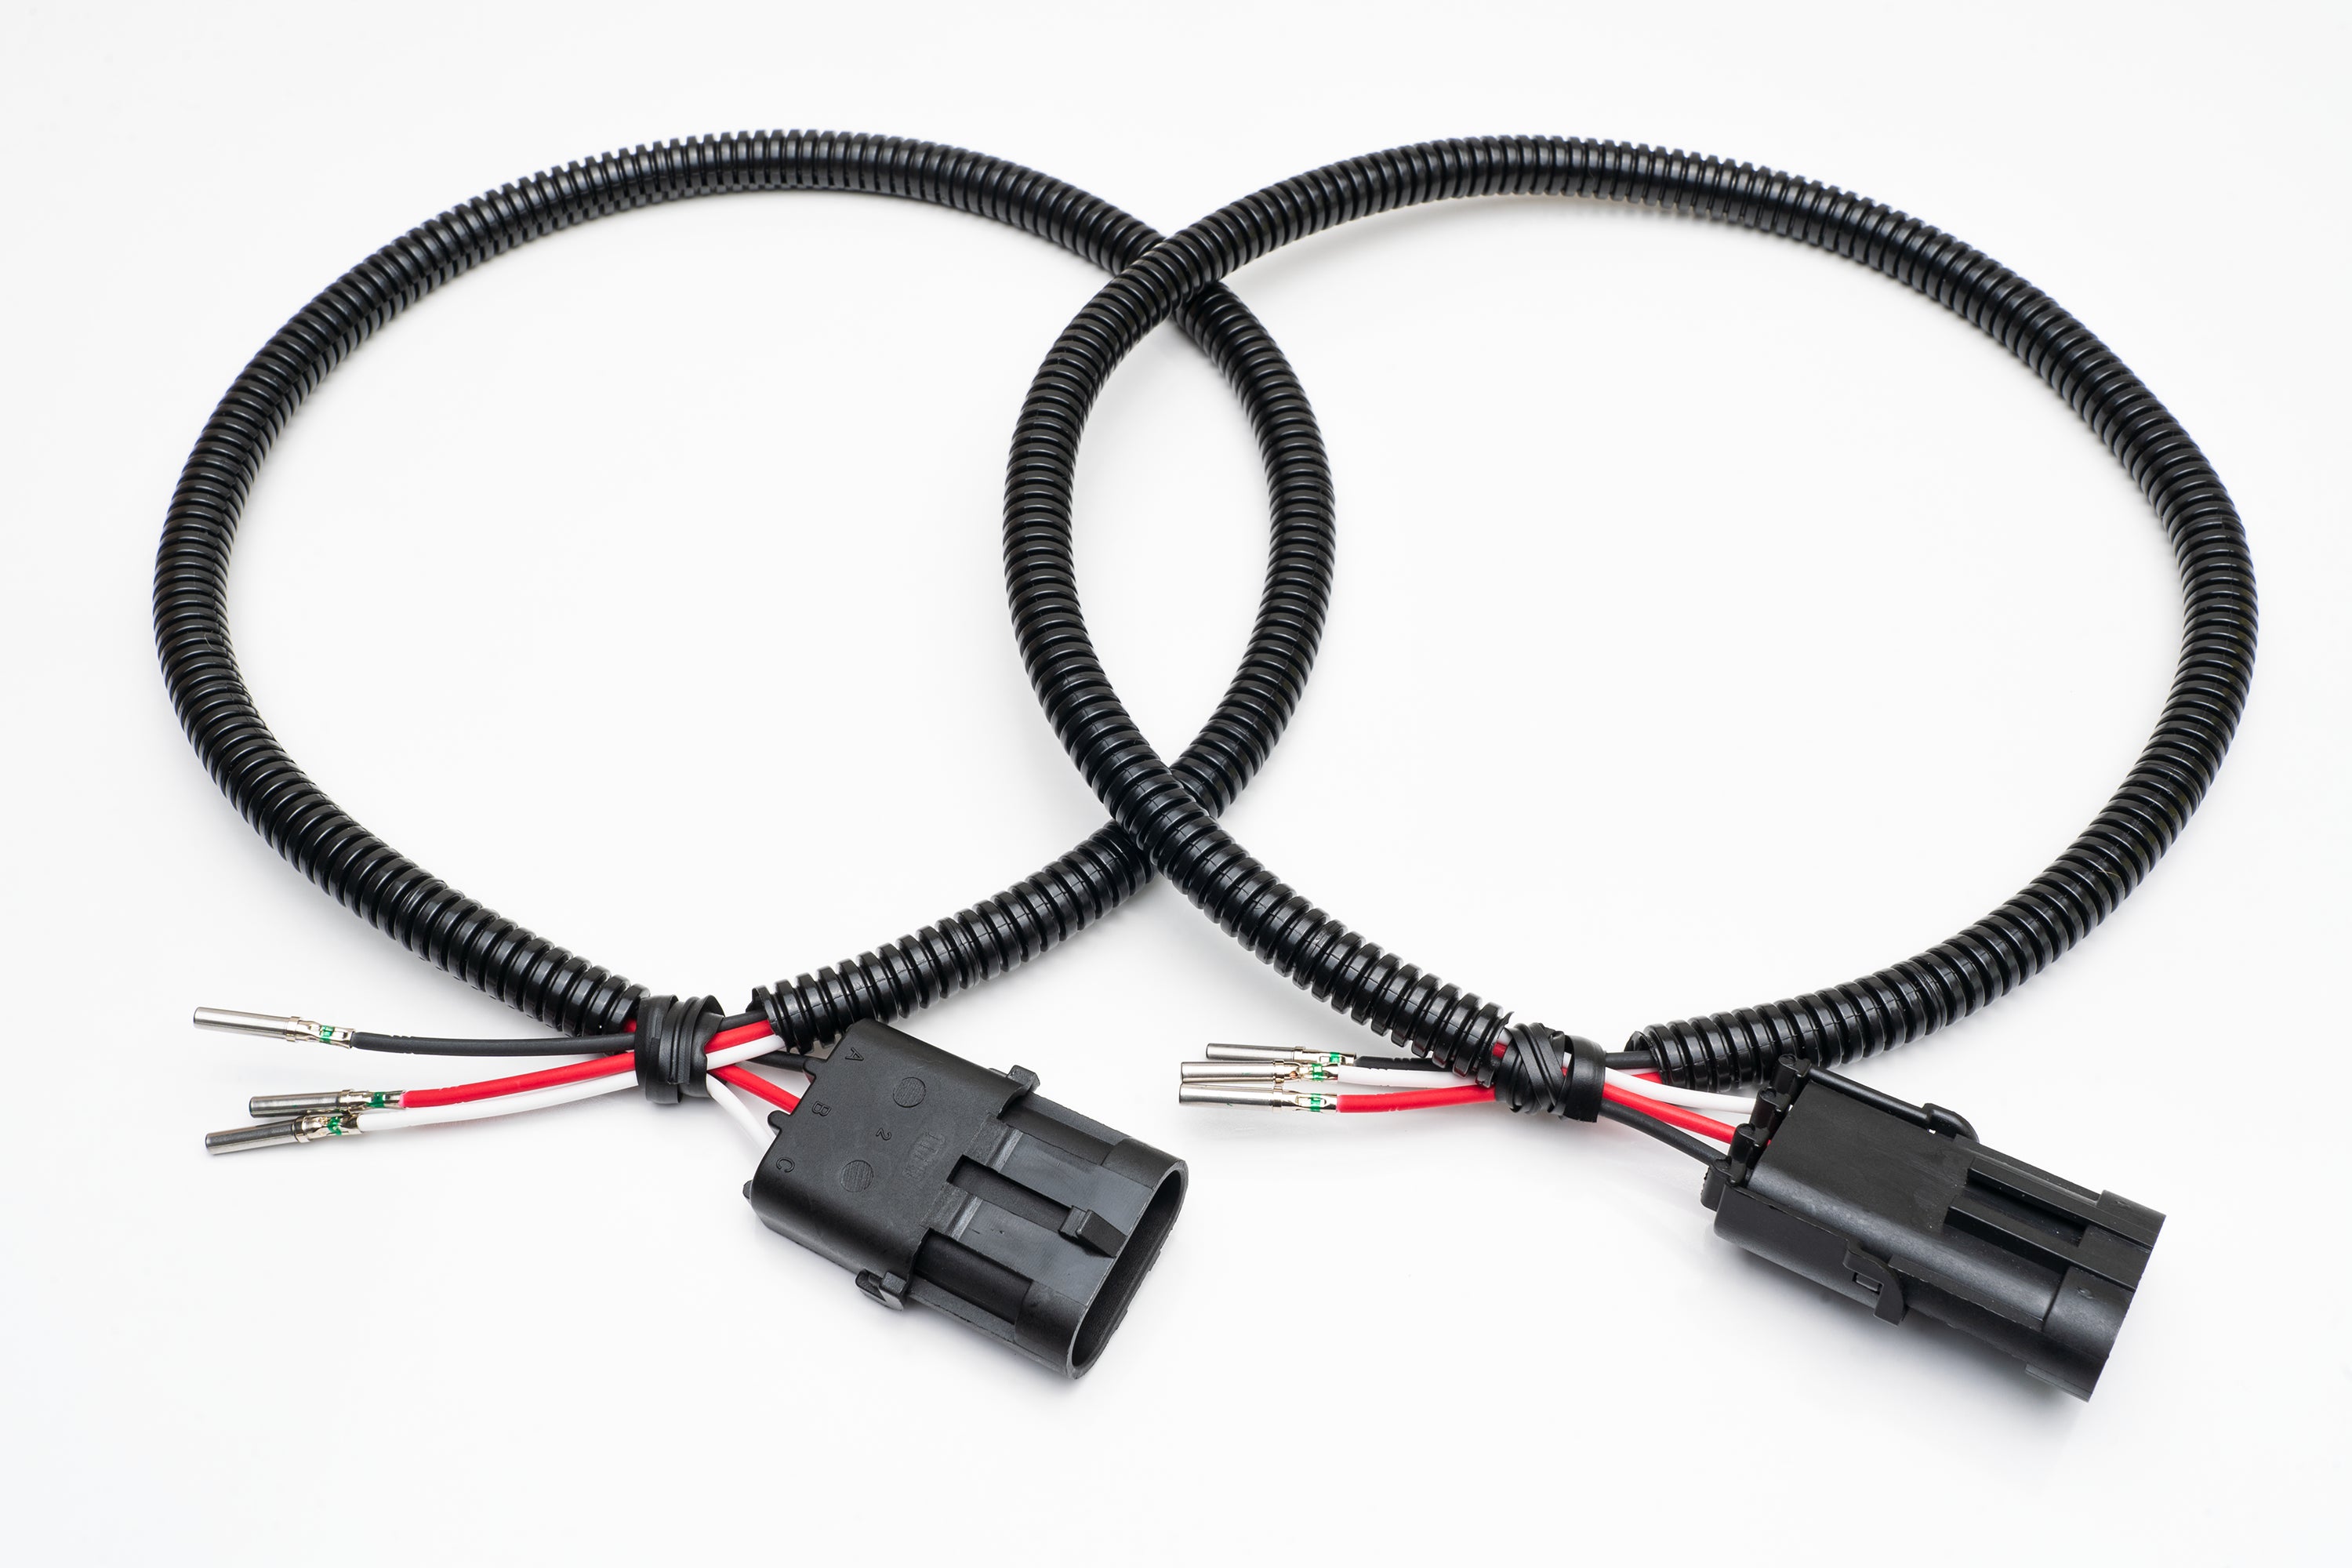 SPV Parts Harness 4 Pole or 3 Pole DT Connector Adapter/EXTENSIONS (PAIR) - SPV Harness System